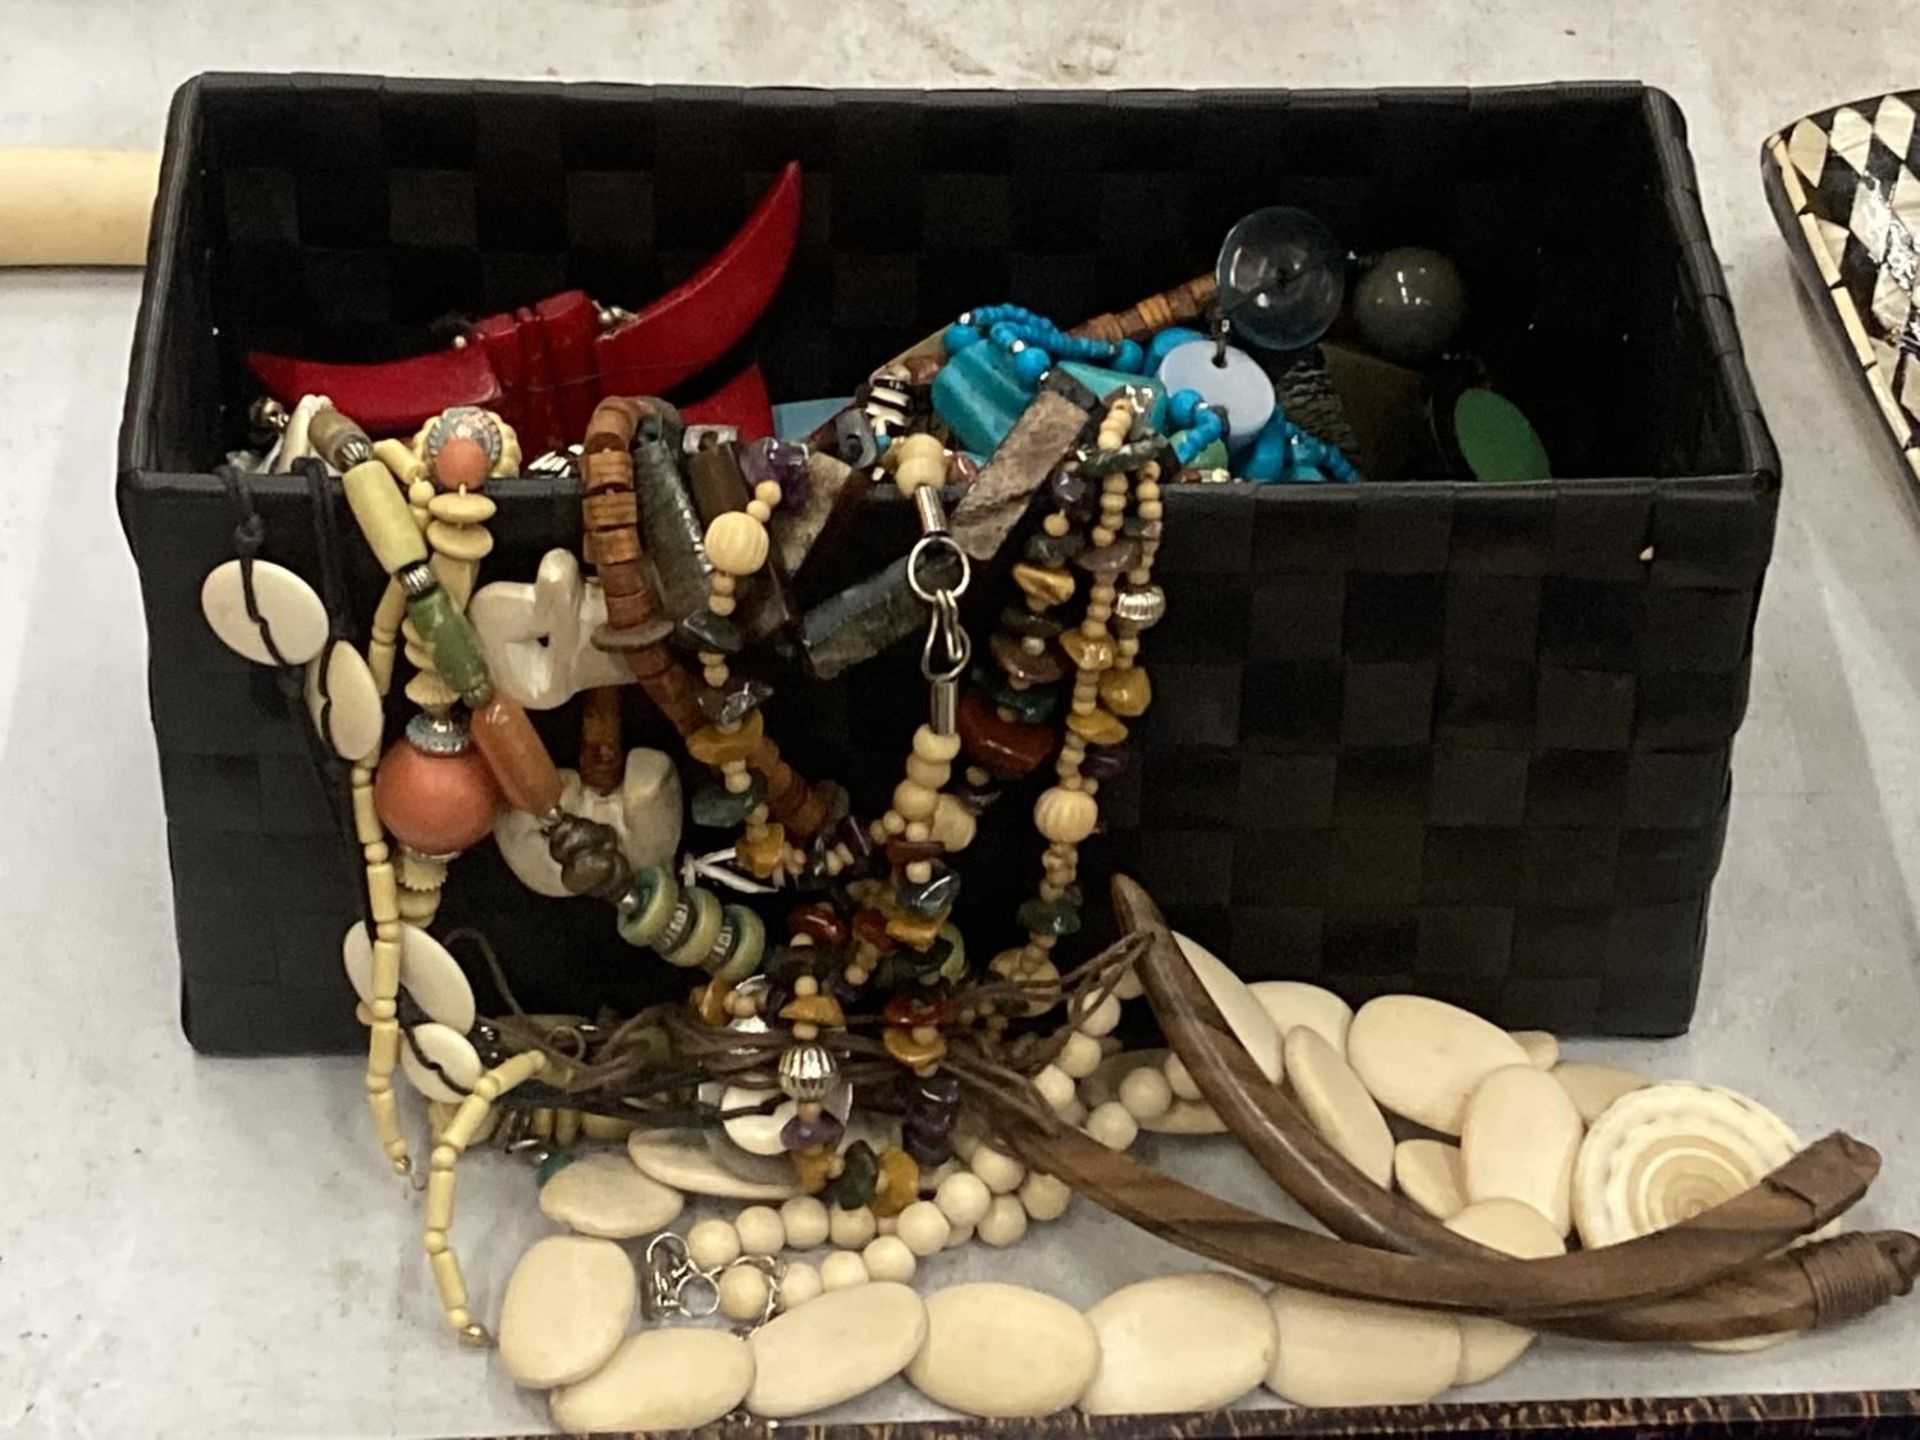 A QUANTITY OF COSTUME JEWELLERY IN A BLACK BASKET